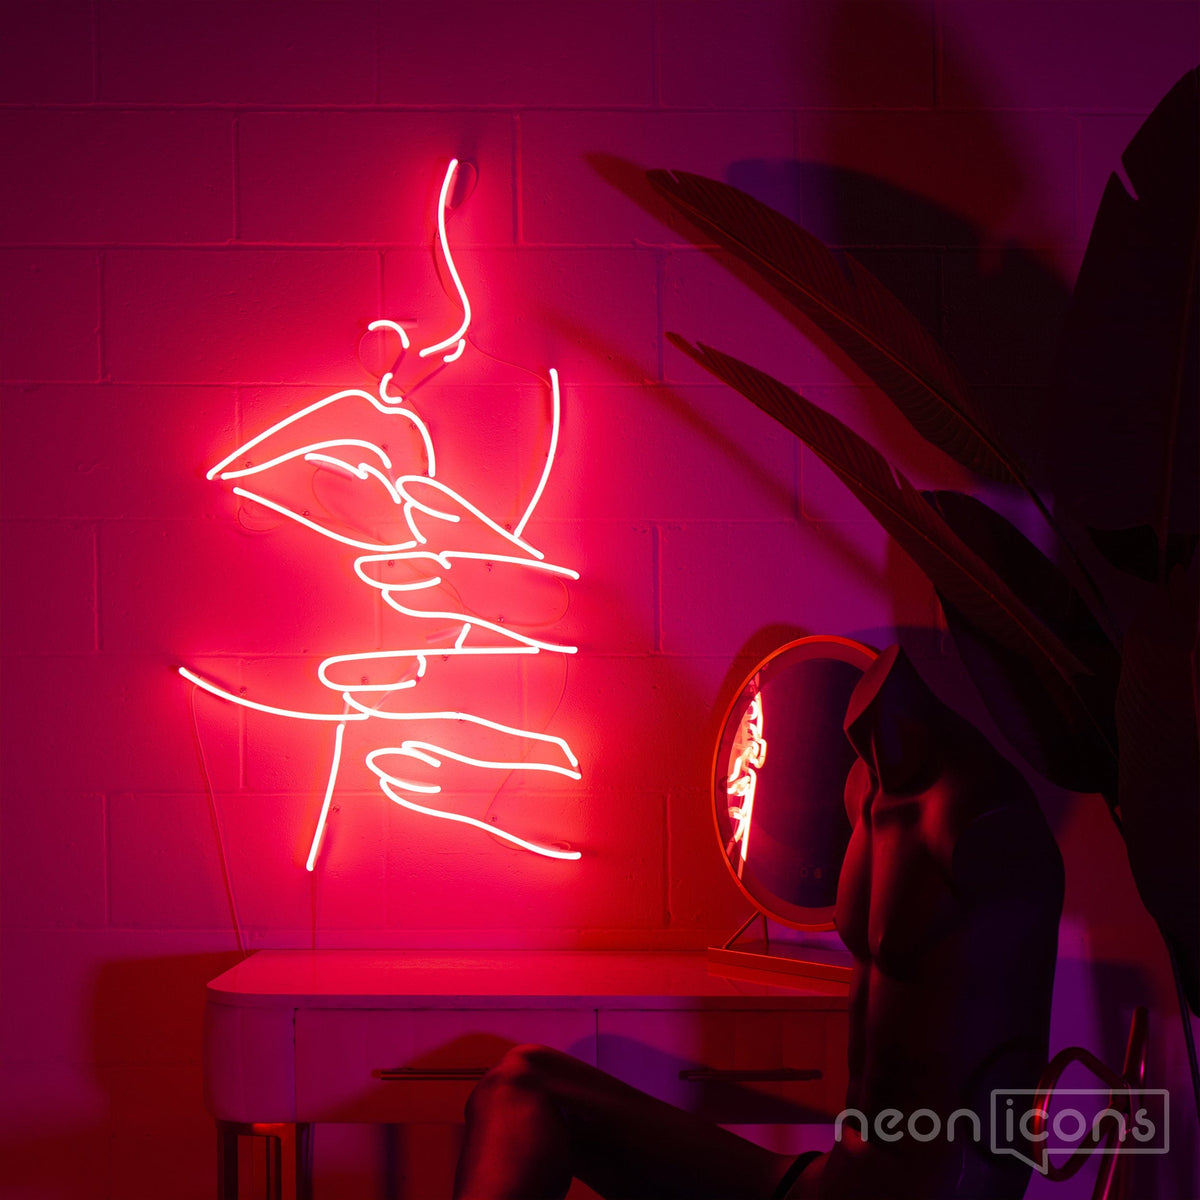 "A Pretty Face" Neon Sign for Beauty & Cosmetic Studios